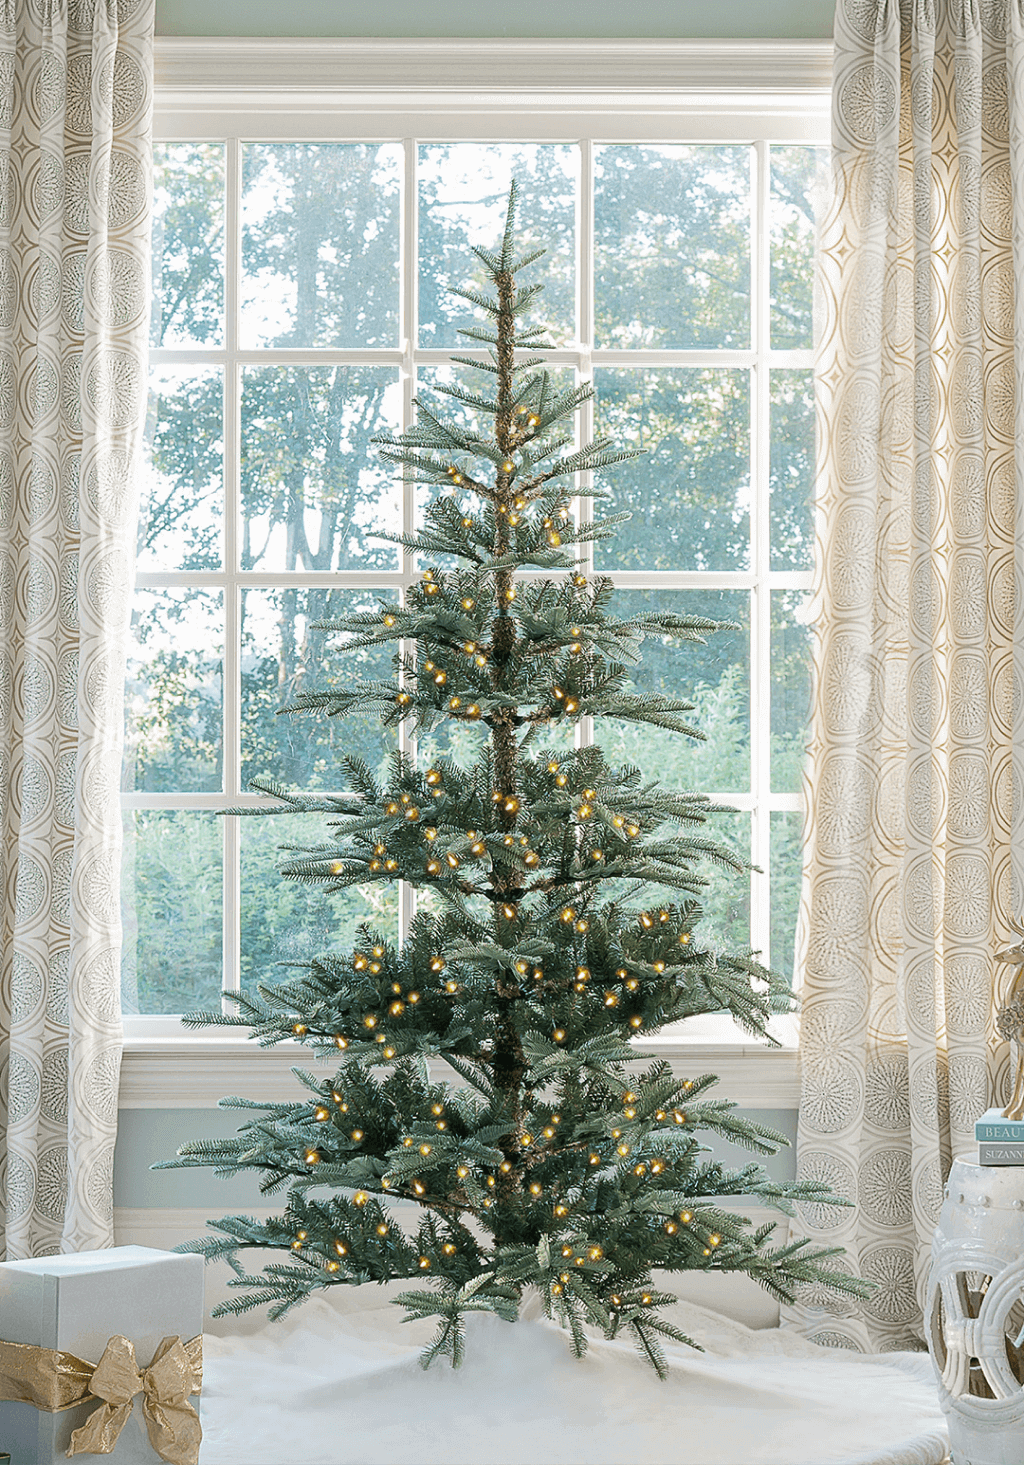 King of Christmas (OPEN BOX) 9' KING NOBLE FIR ARTIFICIAL TREE WITH 700 WARM WHITE LED LIGHTS, FINAL SALE